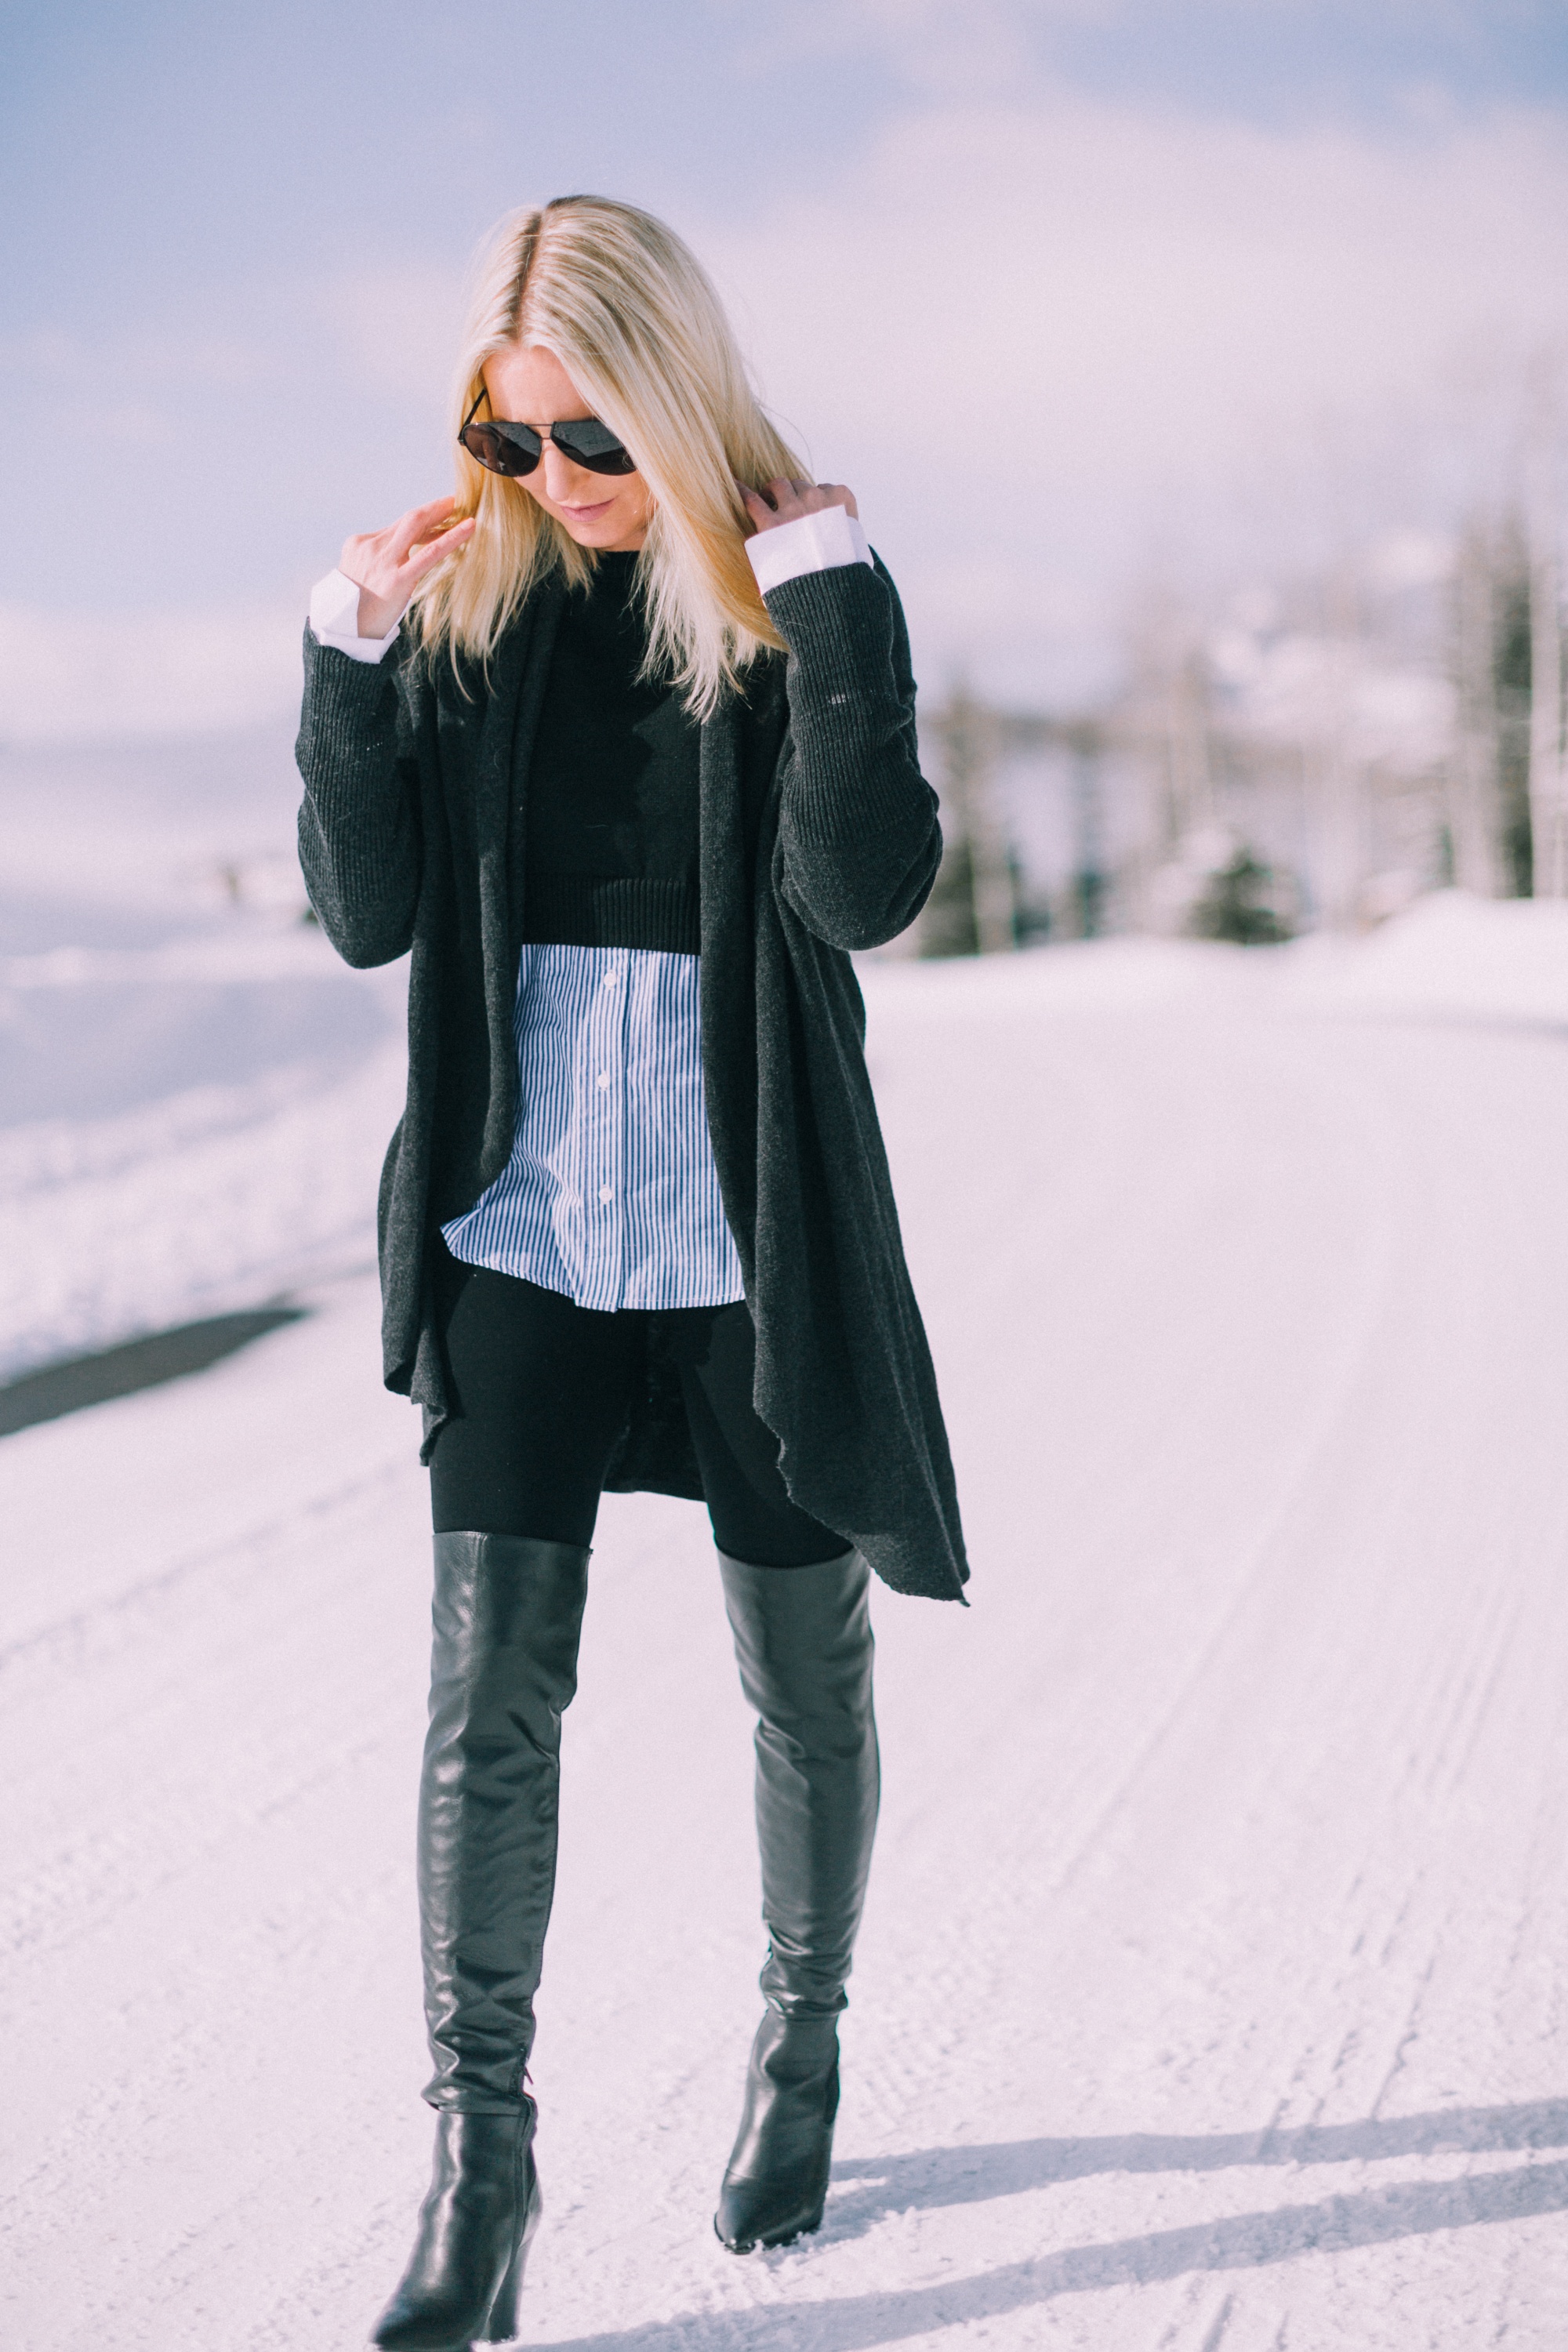 blond fashion blogger over 40 showing how to wear black Spanx leggings in an outfit with Sam Edelman Valda over the knee boots and Barefoot Dreams cardigan in the snow